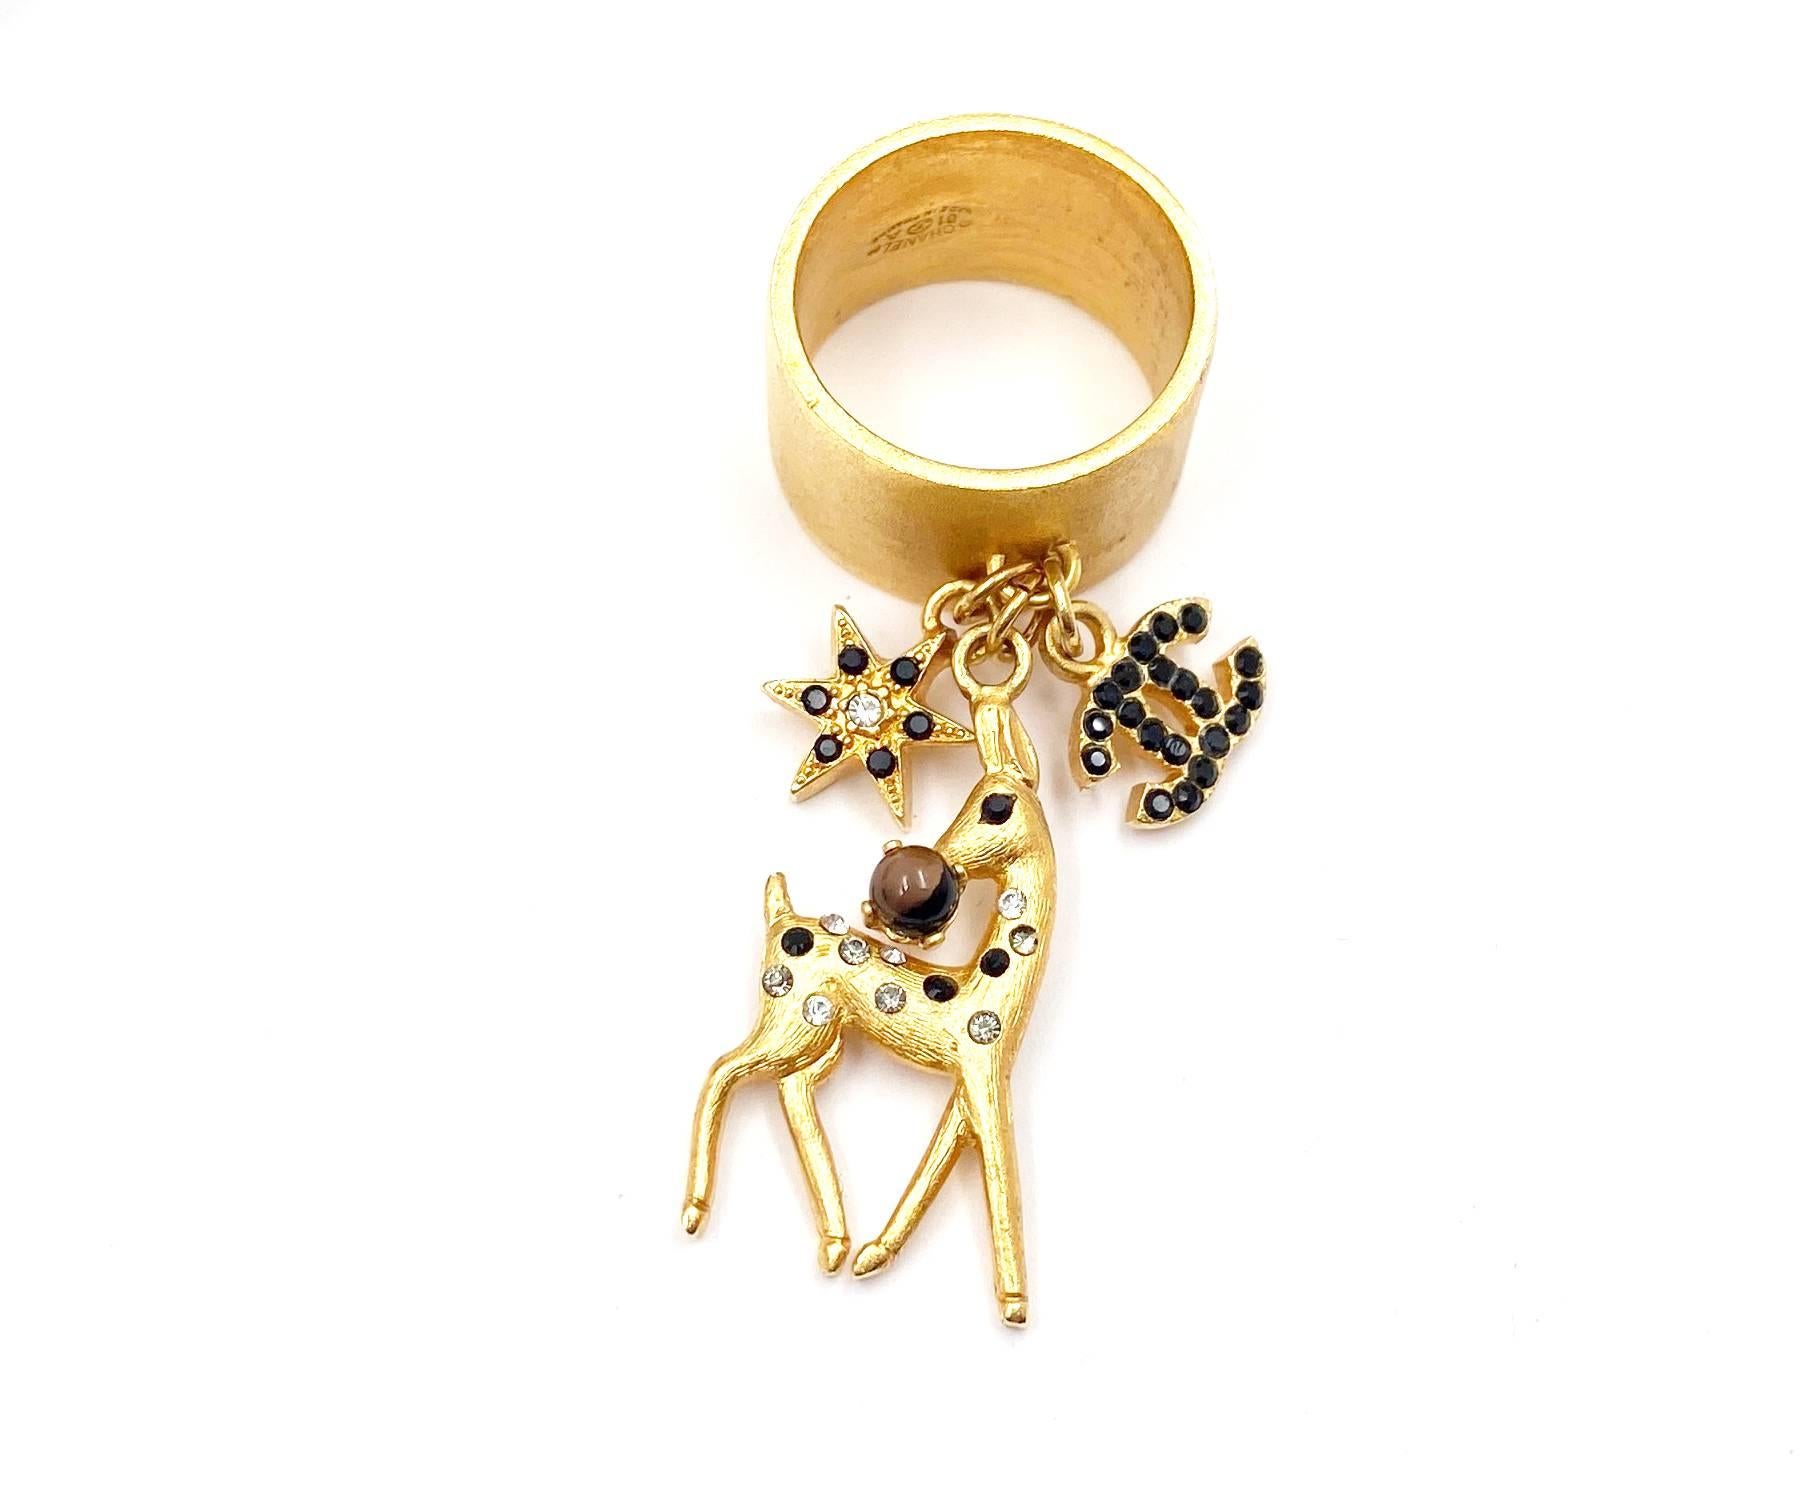 Chanel Rare Vintage Gold Plated Black CC Bambi Deer Ring

*Marked 01
*Made in France
*Comes with original box

-Approximately size 7
-Bambi and CC logo are approximately 1.5″ x 0.5″ total.
-In a very good vintage condition

2081-43187